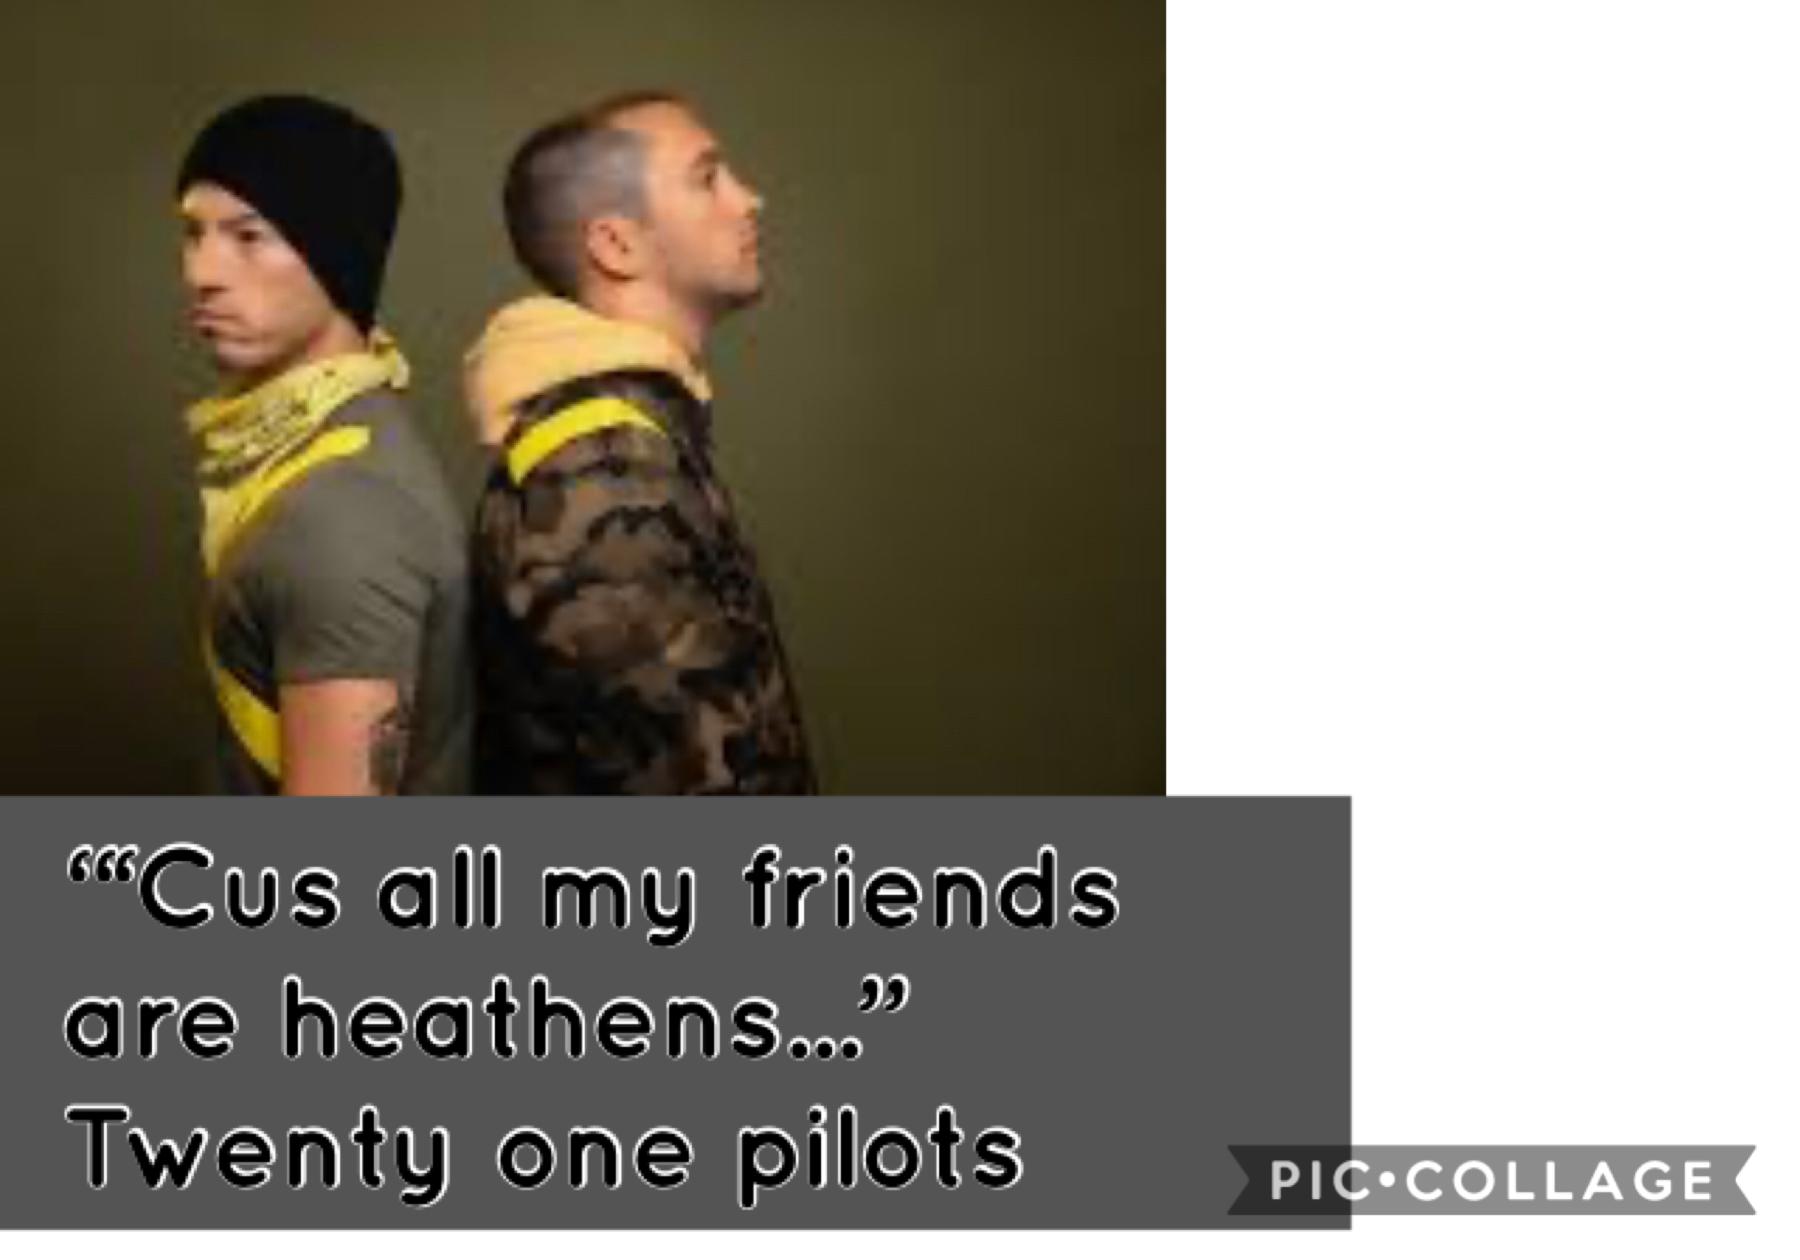 Another random post that is this time twenty one pilots 